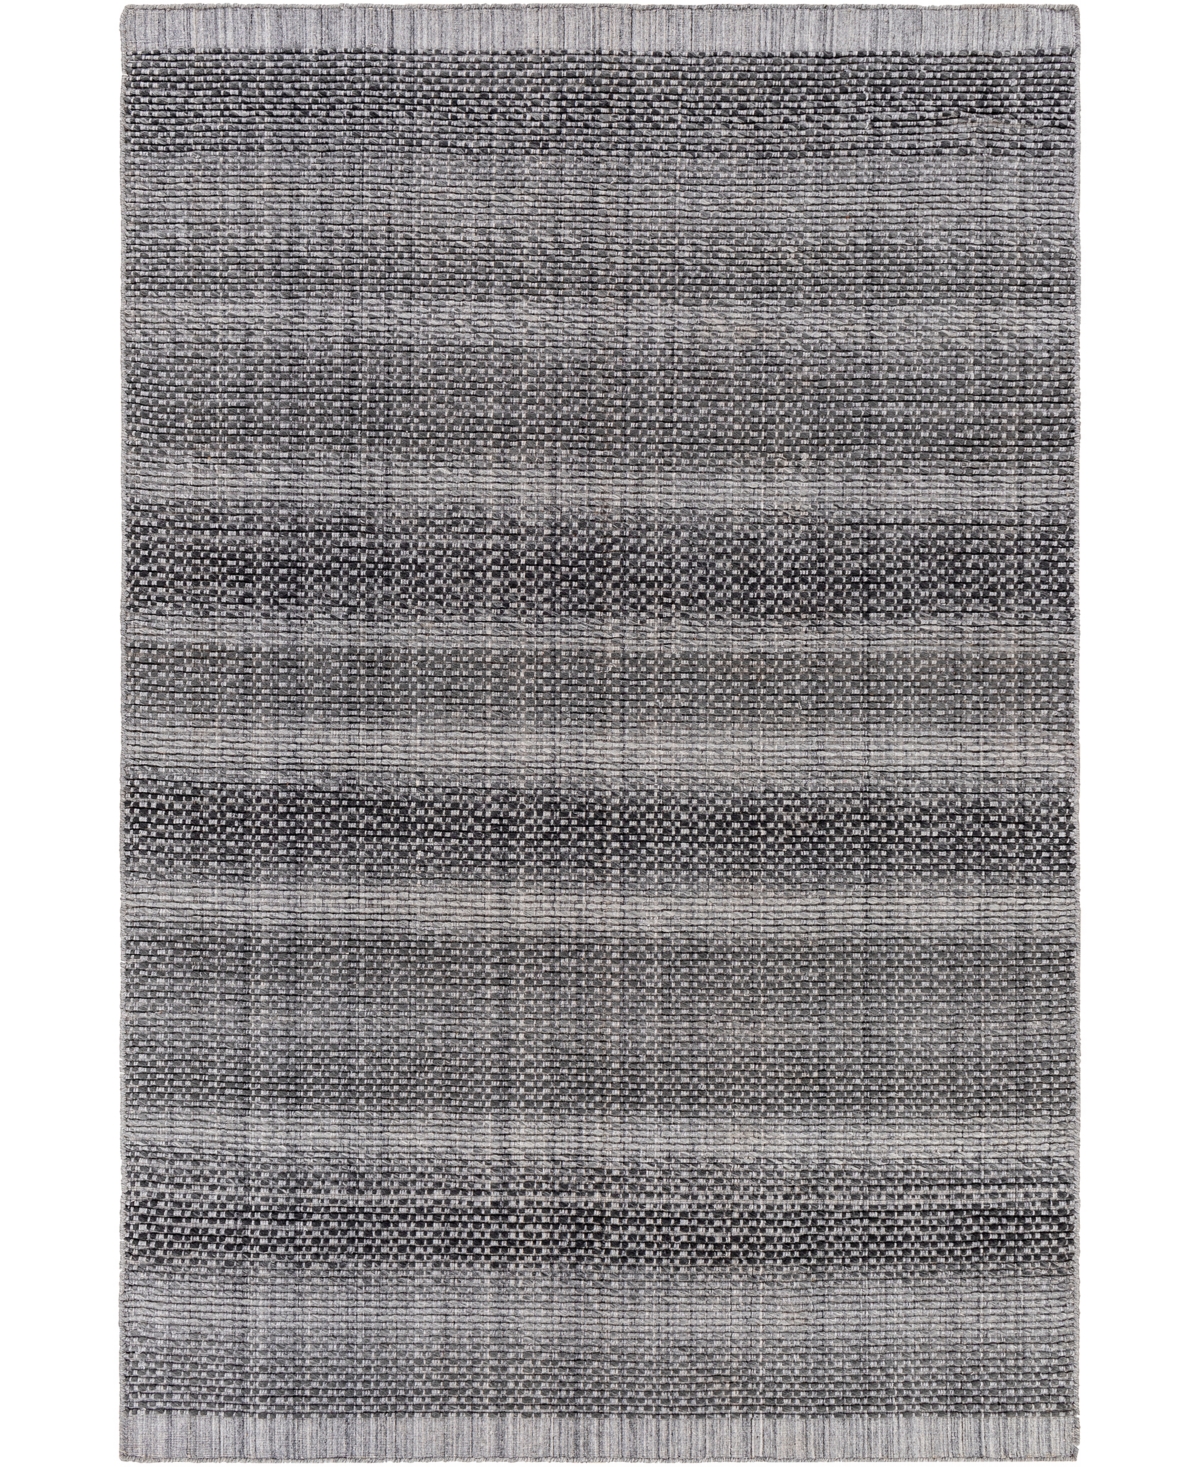 Surya Sycamore Syc-2301 5in x 7'6in Outdoor Area Rug - Charcoal